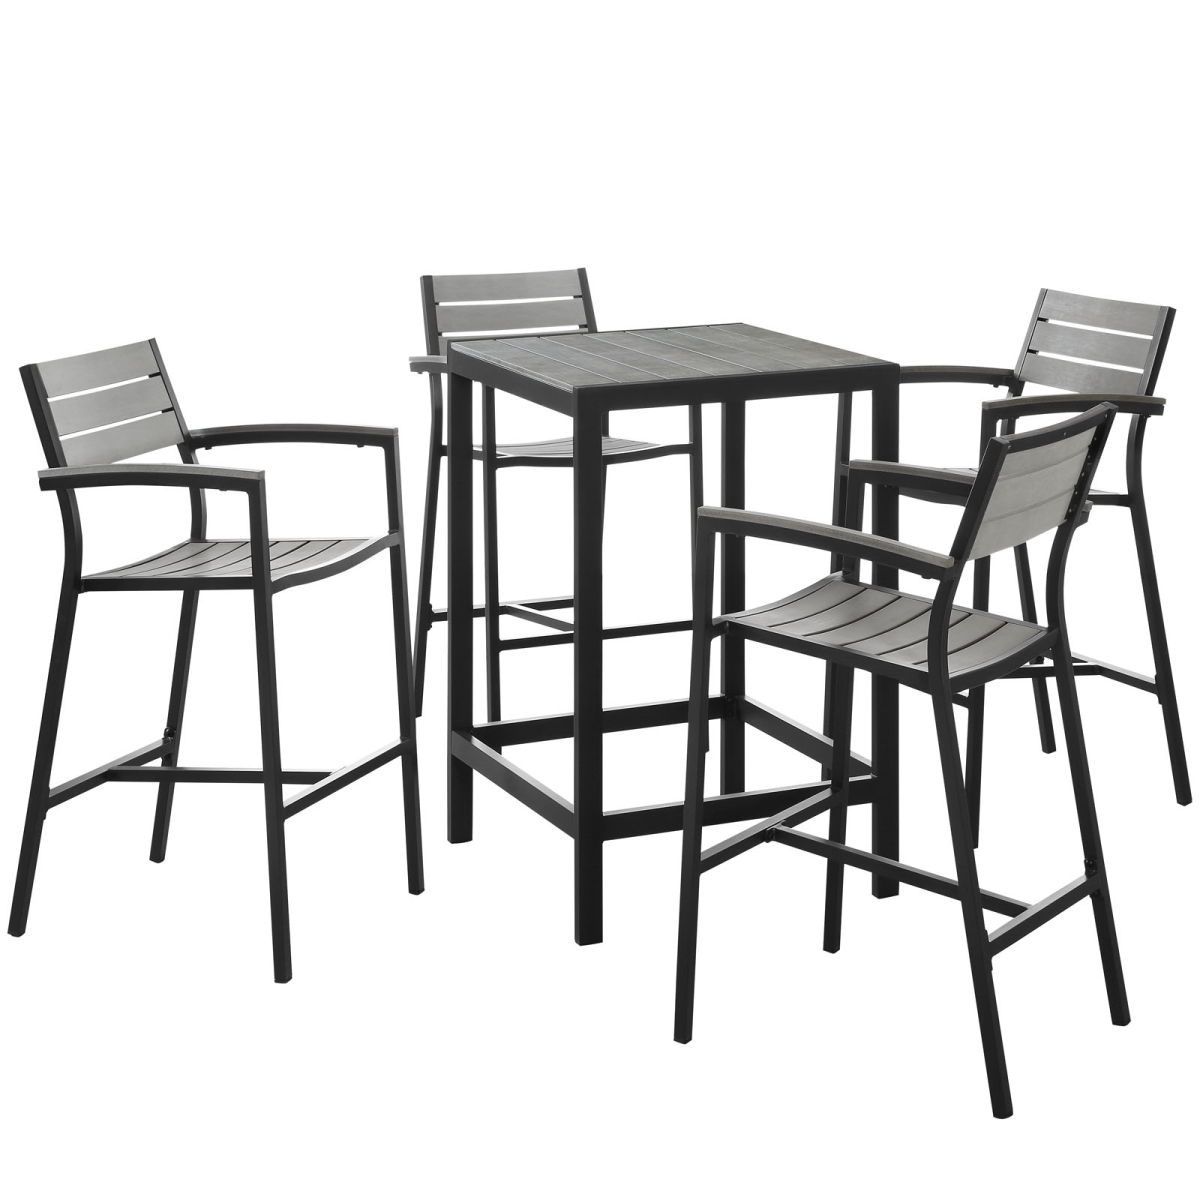 Eastend Eei-1755-brn-gry-set 5 Piece Maine Outdoor Patio Bar Set Gray Plywood With Brown Aluminum Frame